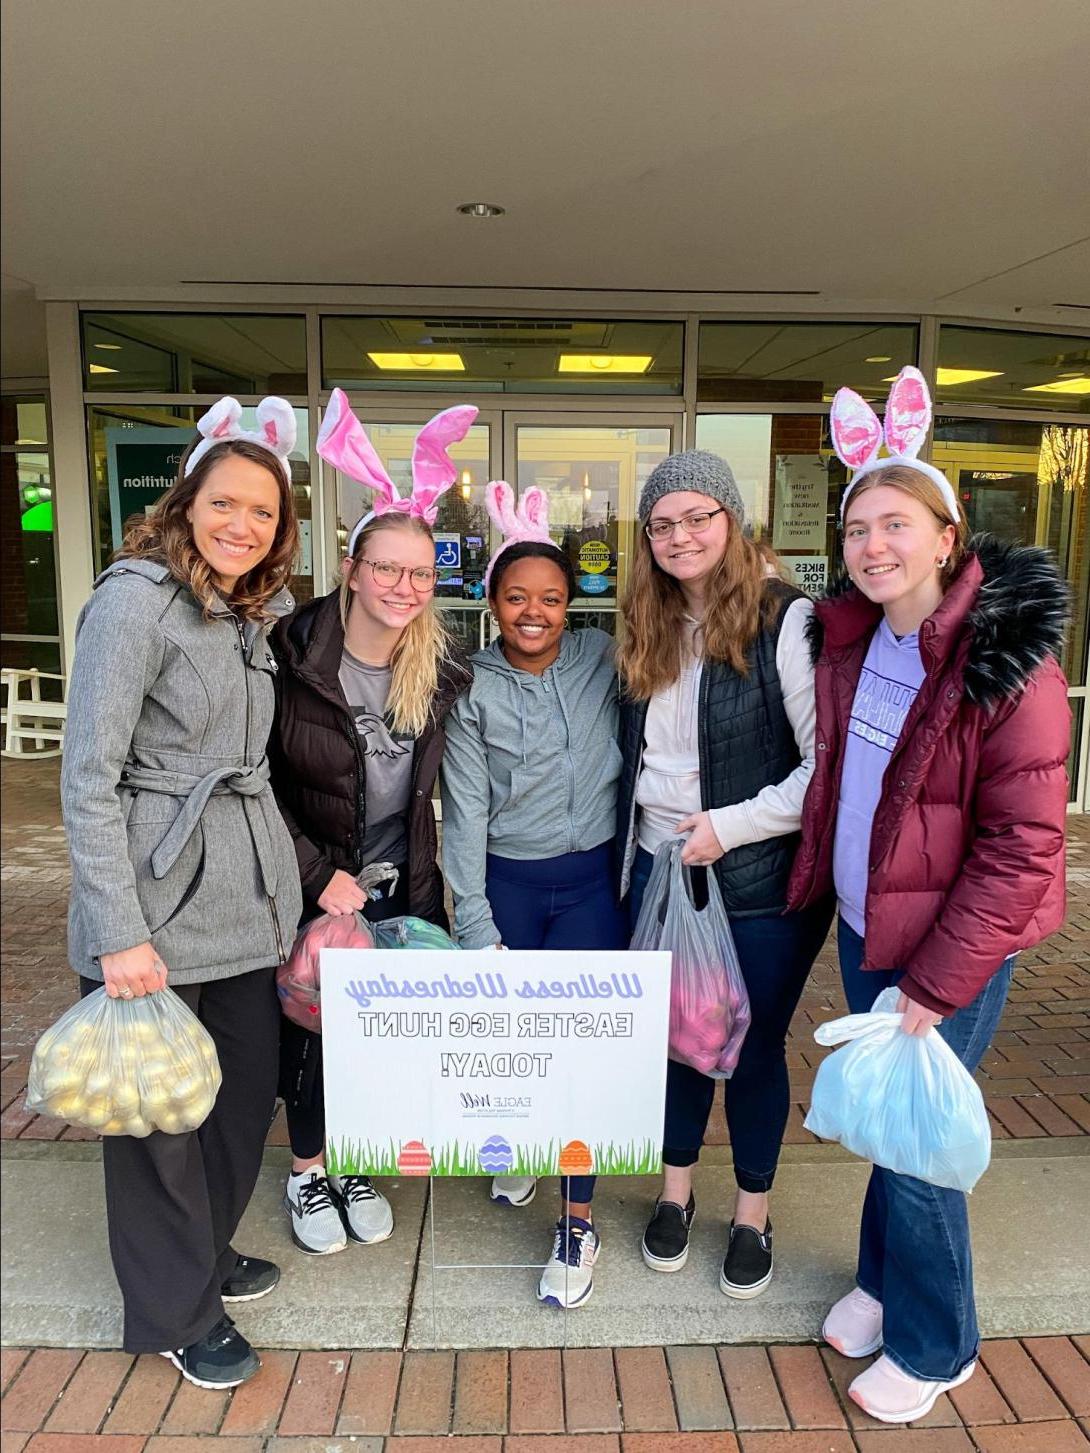 Students participating in Easter Egg Hunt, wearing bunny ears and holding bags of eggs.